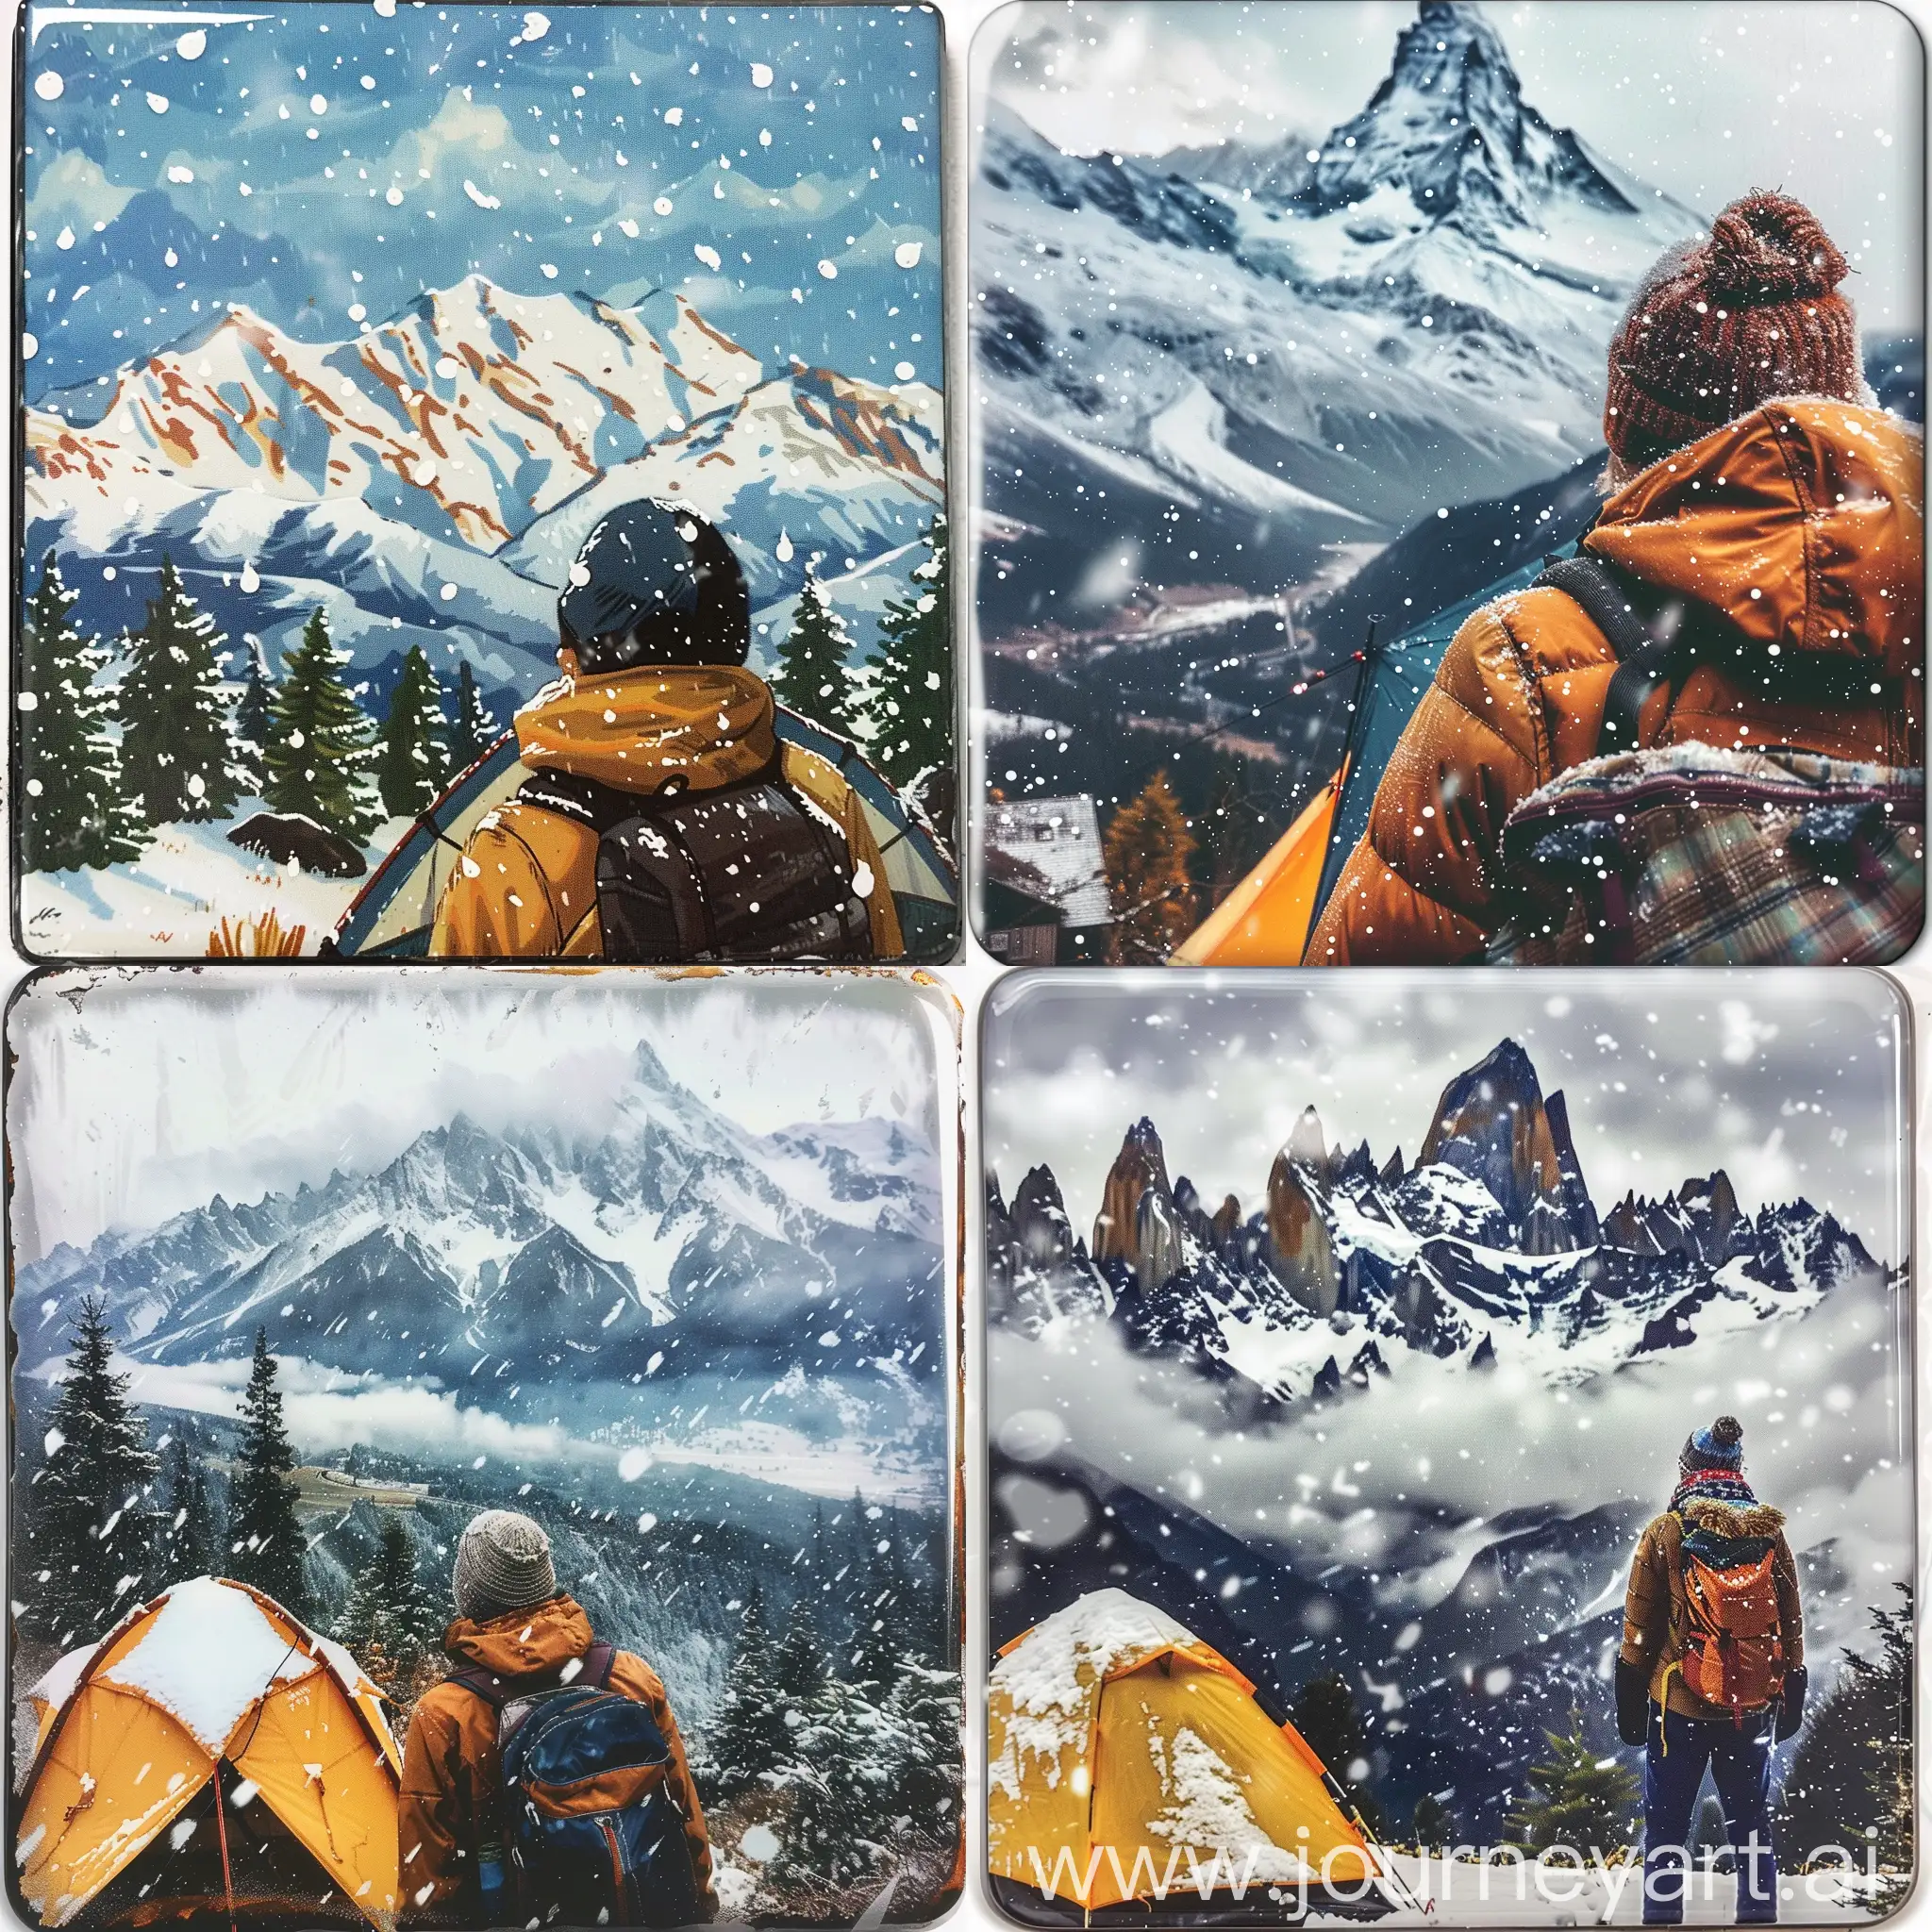 A refrigerator magnet. A hiker is camping and looking at the beautiful scenery at the foot of the snow-capped mountains. It is snowing heavily and there is snow on the roof of the tent.